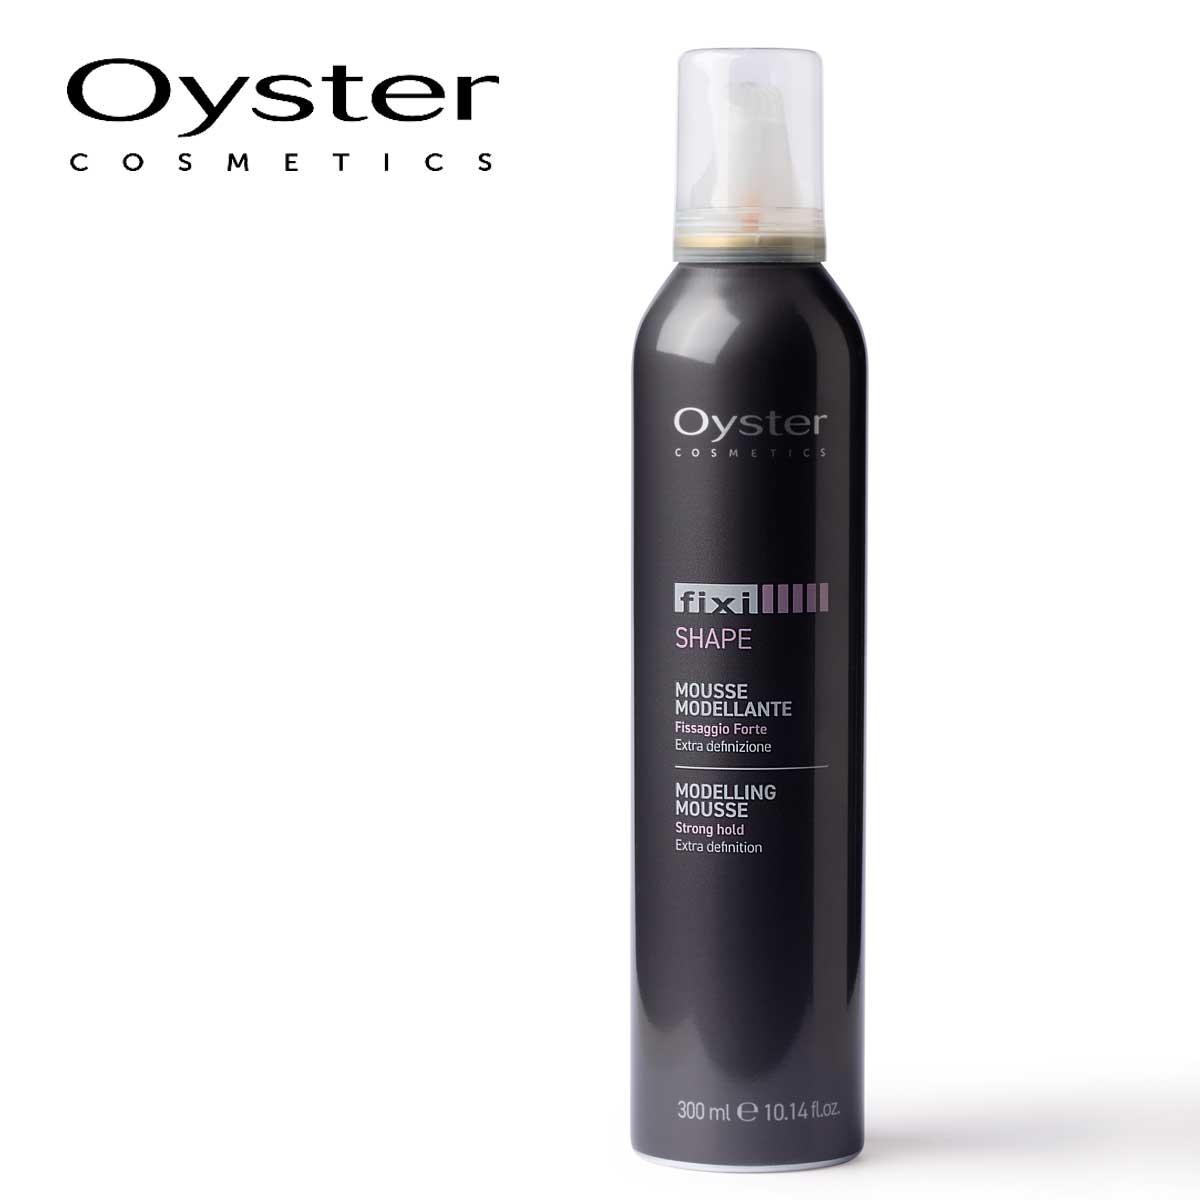 Oyster fixi shape mousse fiss.forte extra definizione 300ml.